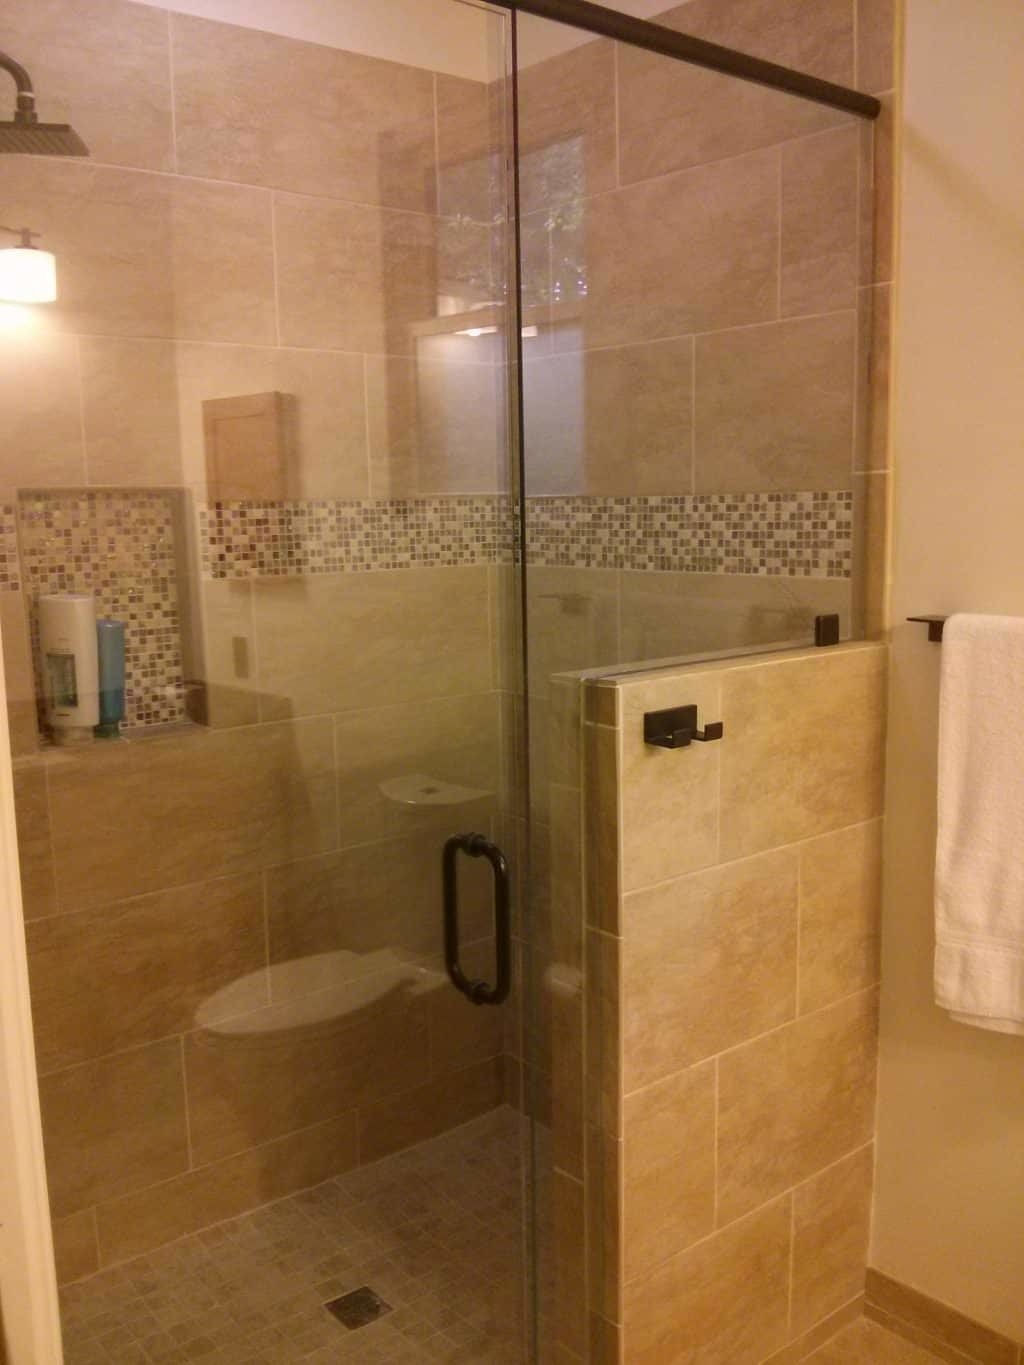 Curbless Shower Remodel - $22,500, Tallahassee